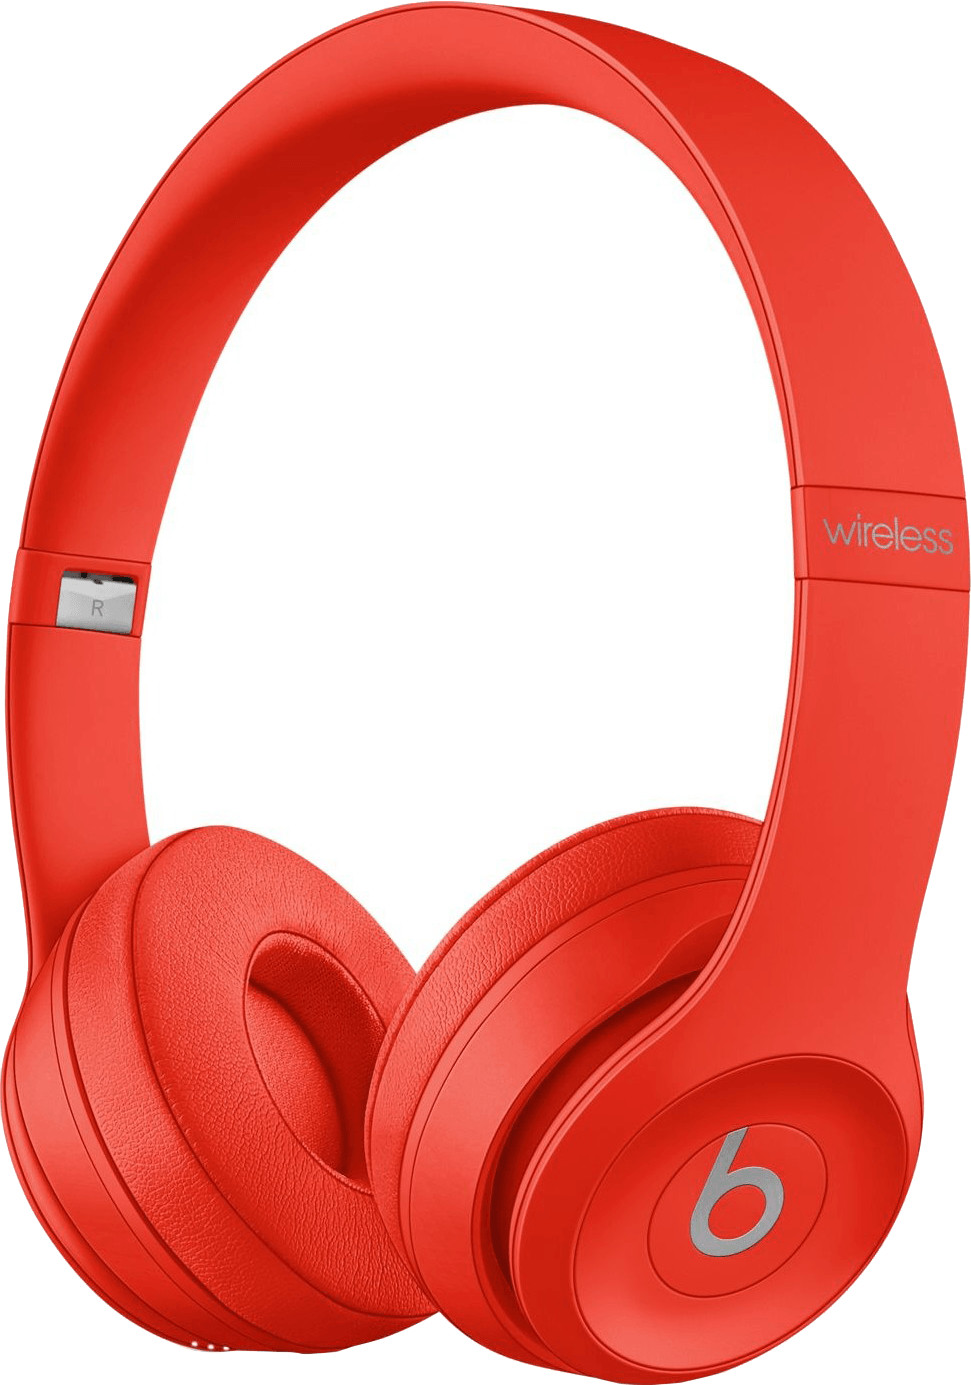 Buy Beats By Dre Solo3 Wireless (Citrus Red) from £129.00 (Today